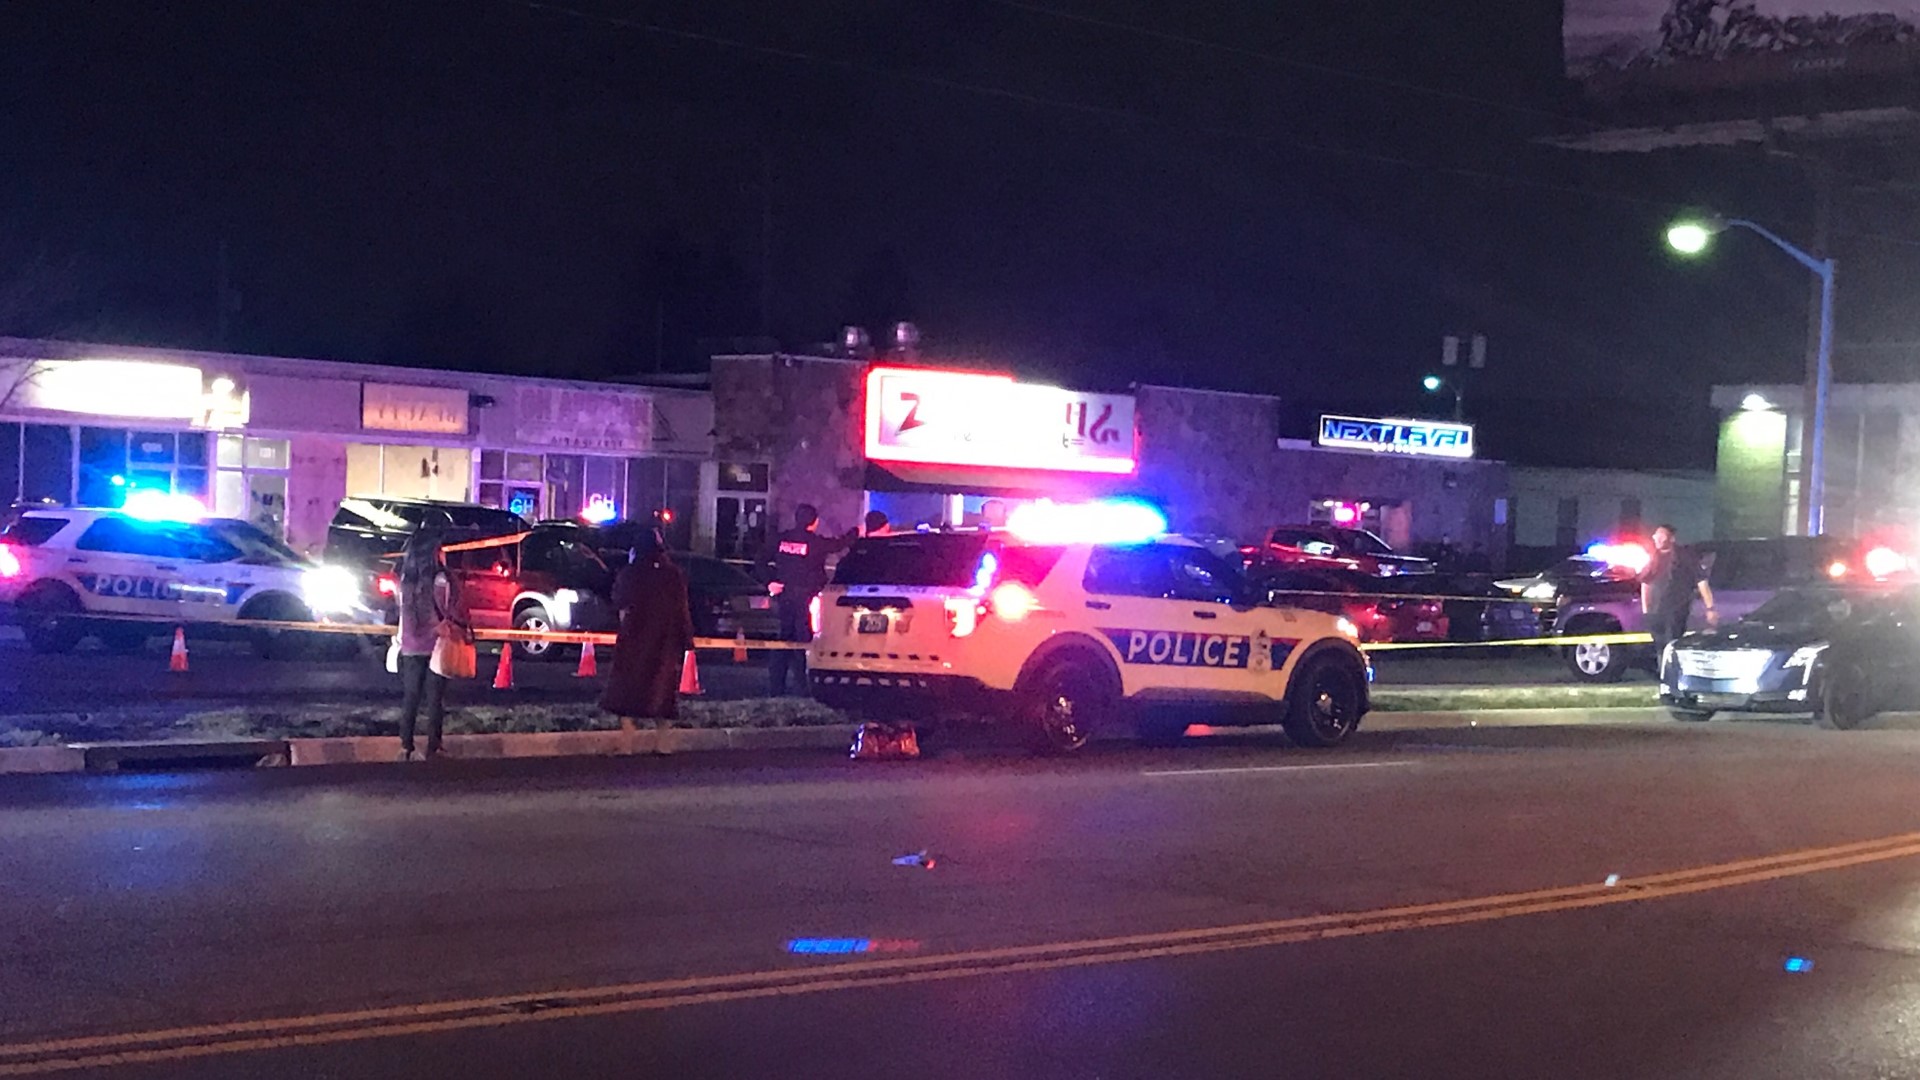 The shooting happened on the 1400 block of South Hamilton Road near a shopping plaza just after 2 a.m.